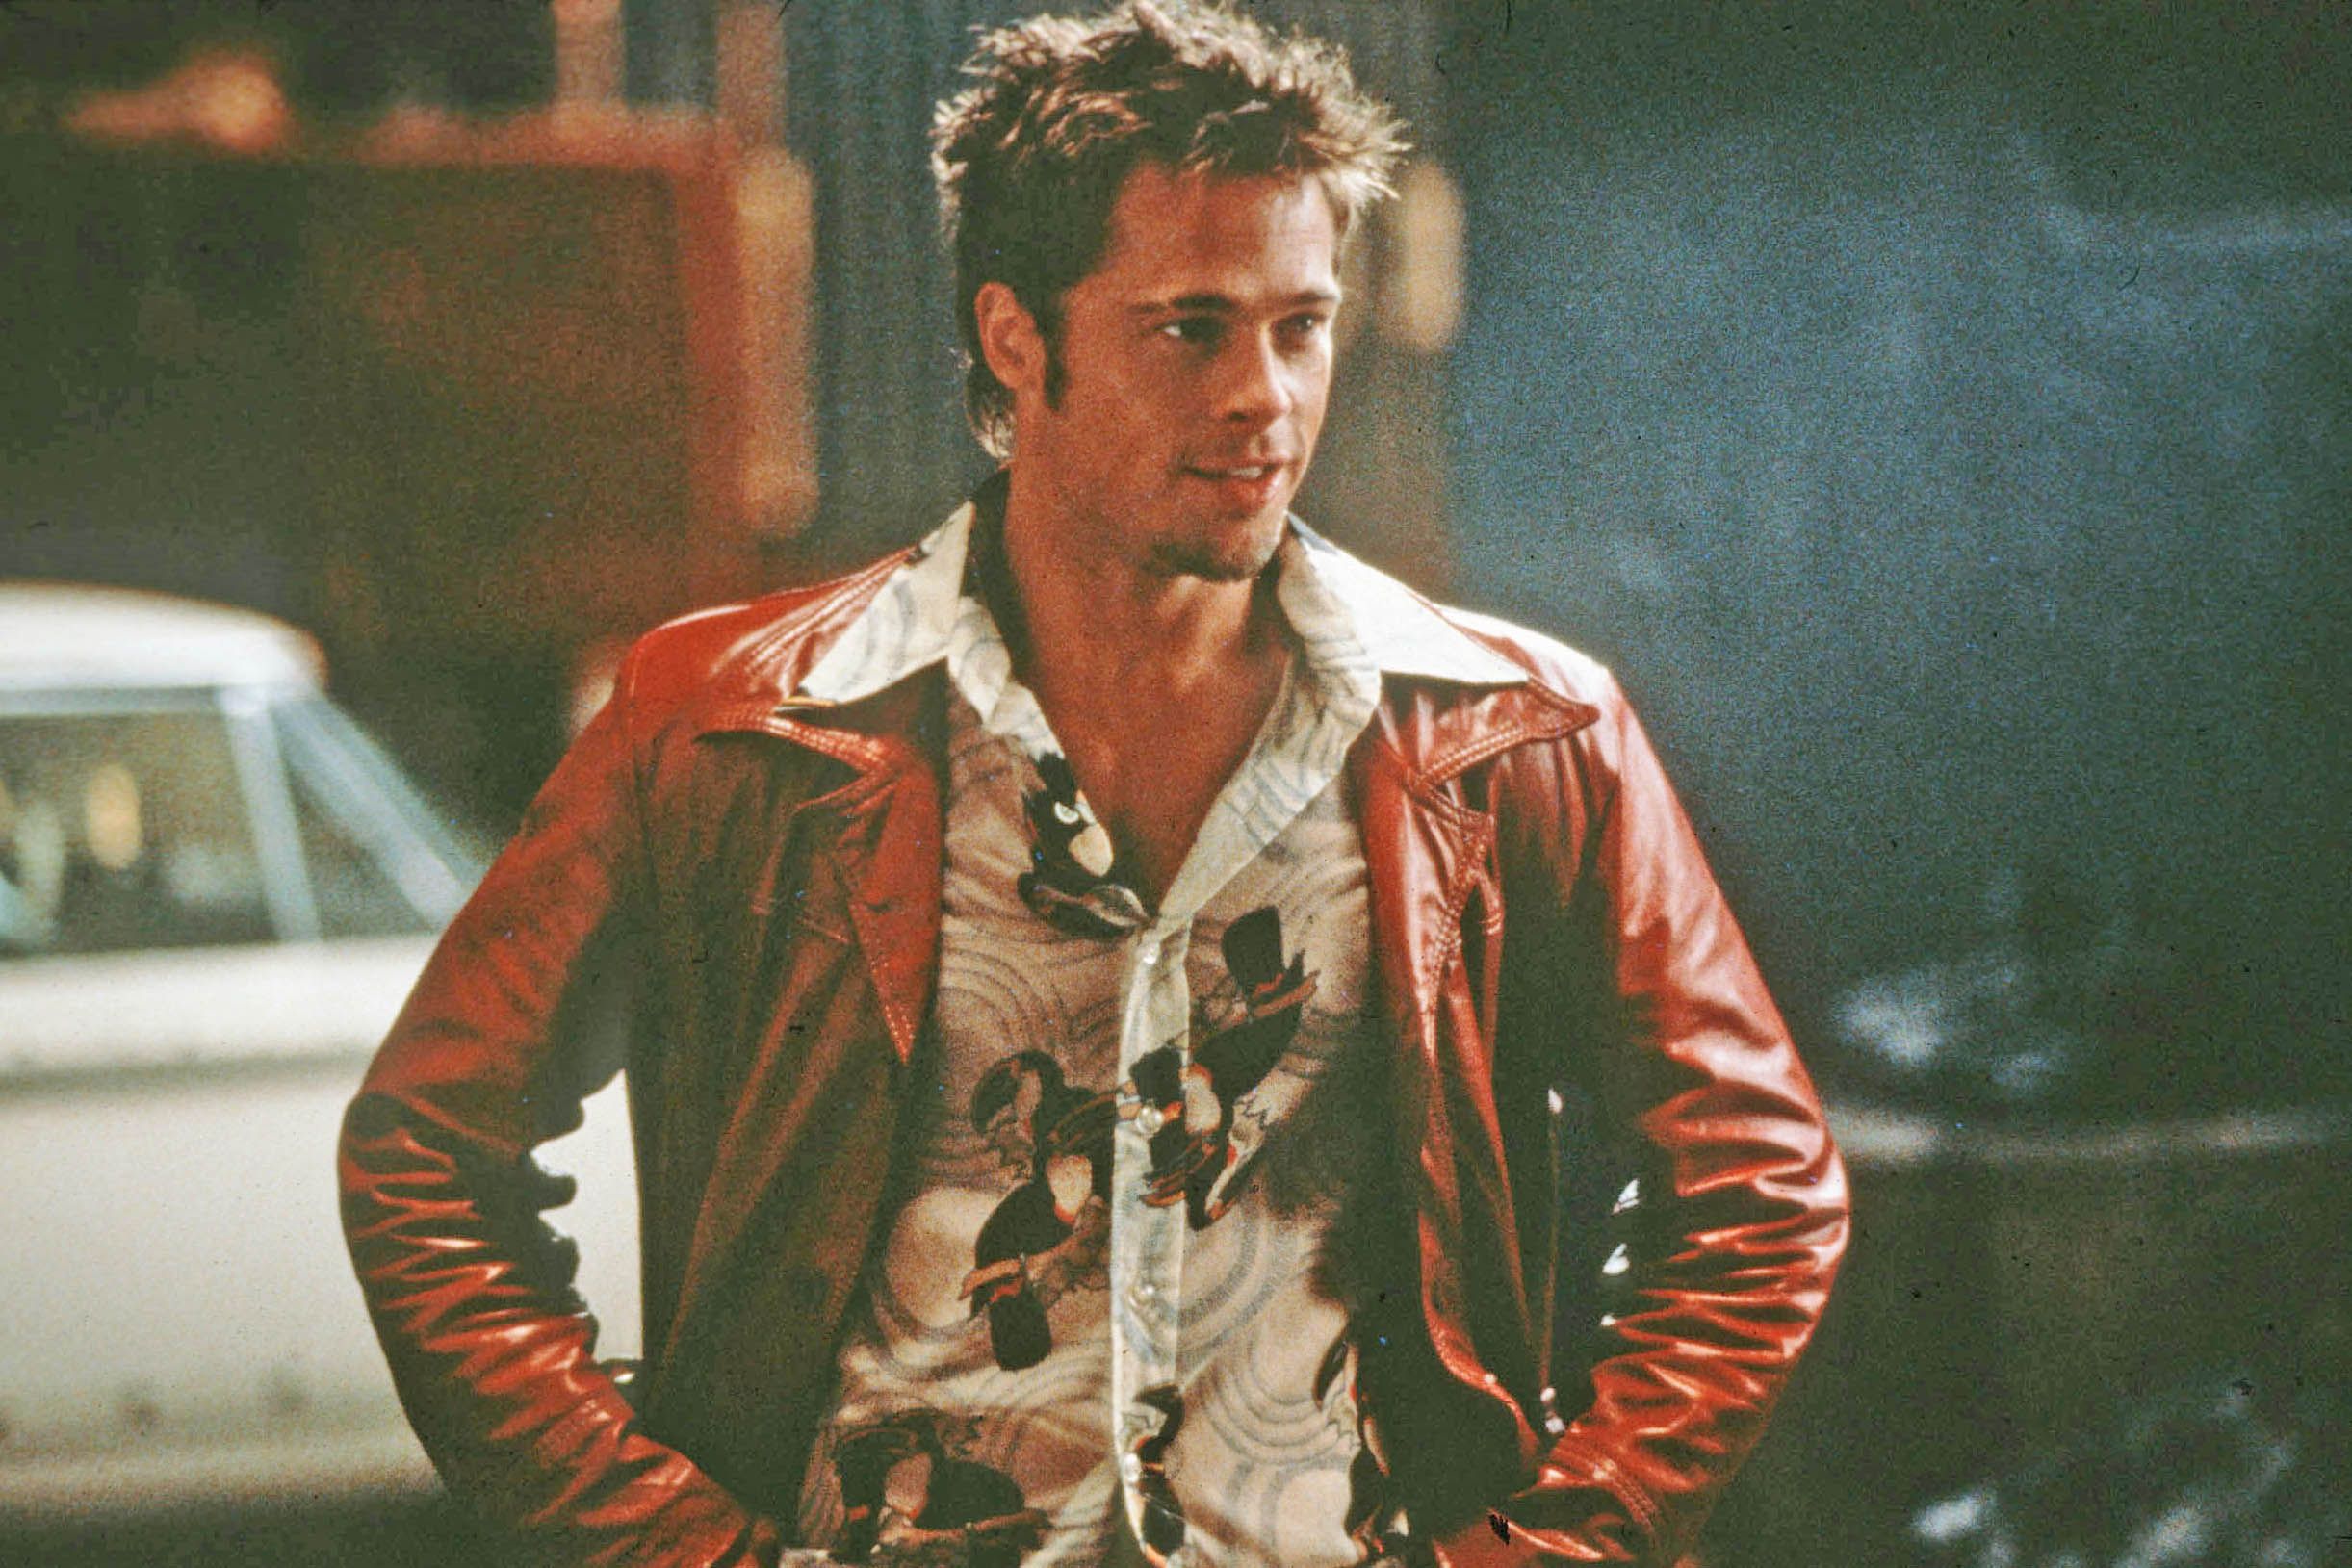 Brad Pitt's Fight Club Jacket Was the Movie's Only Good Character